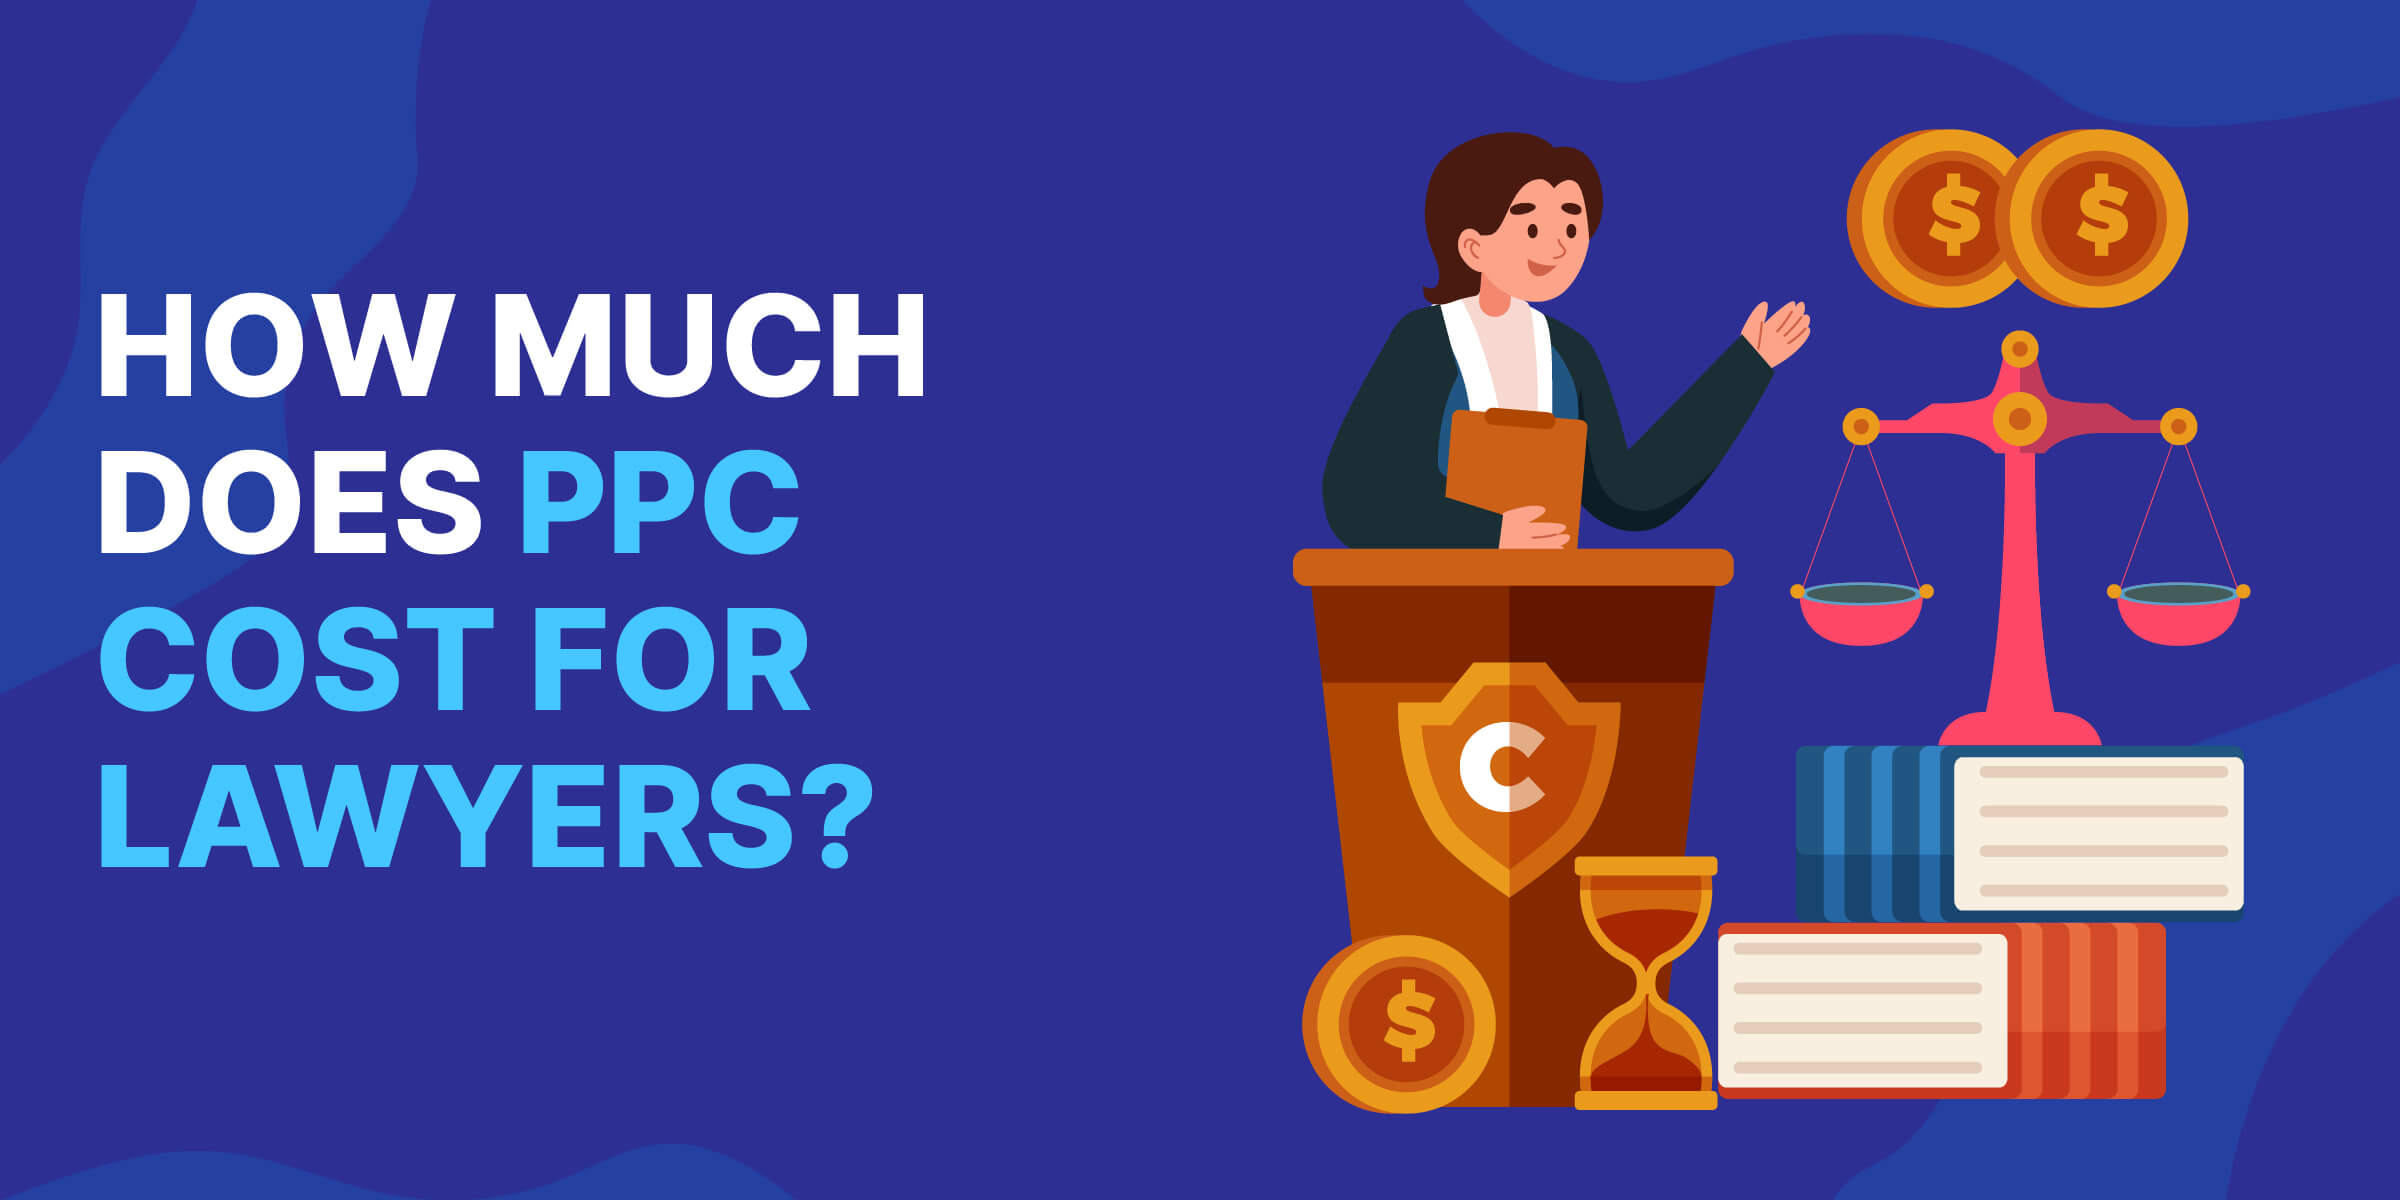 How Mich Does PPC Cost for Lawyers